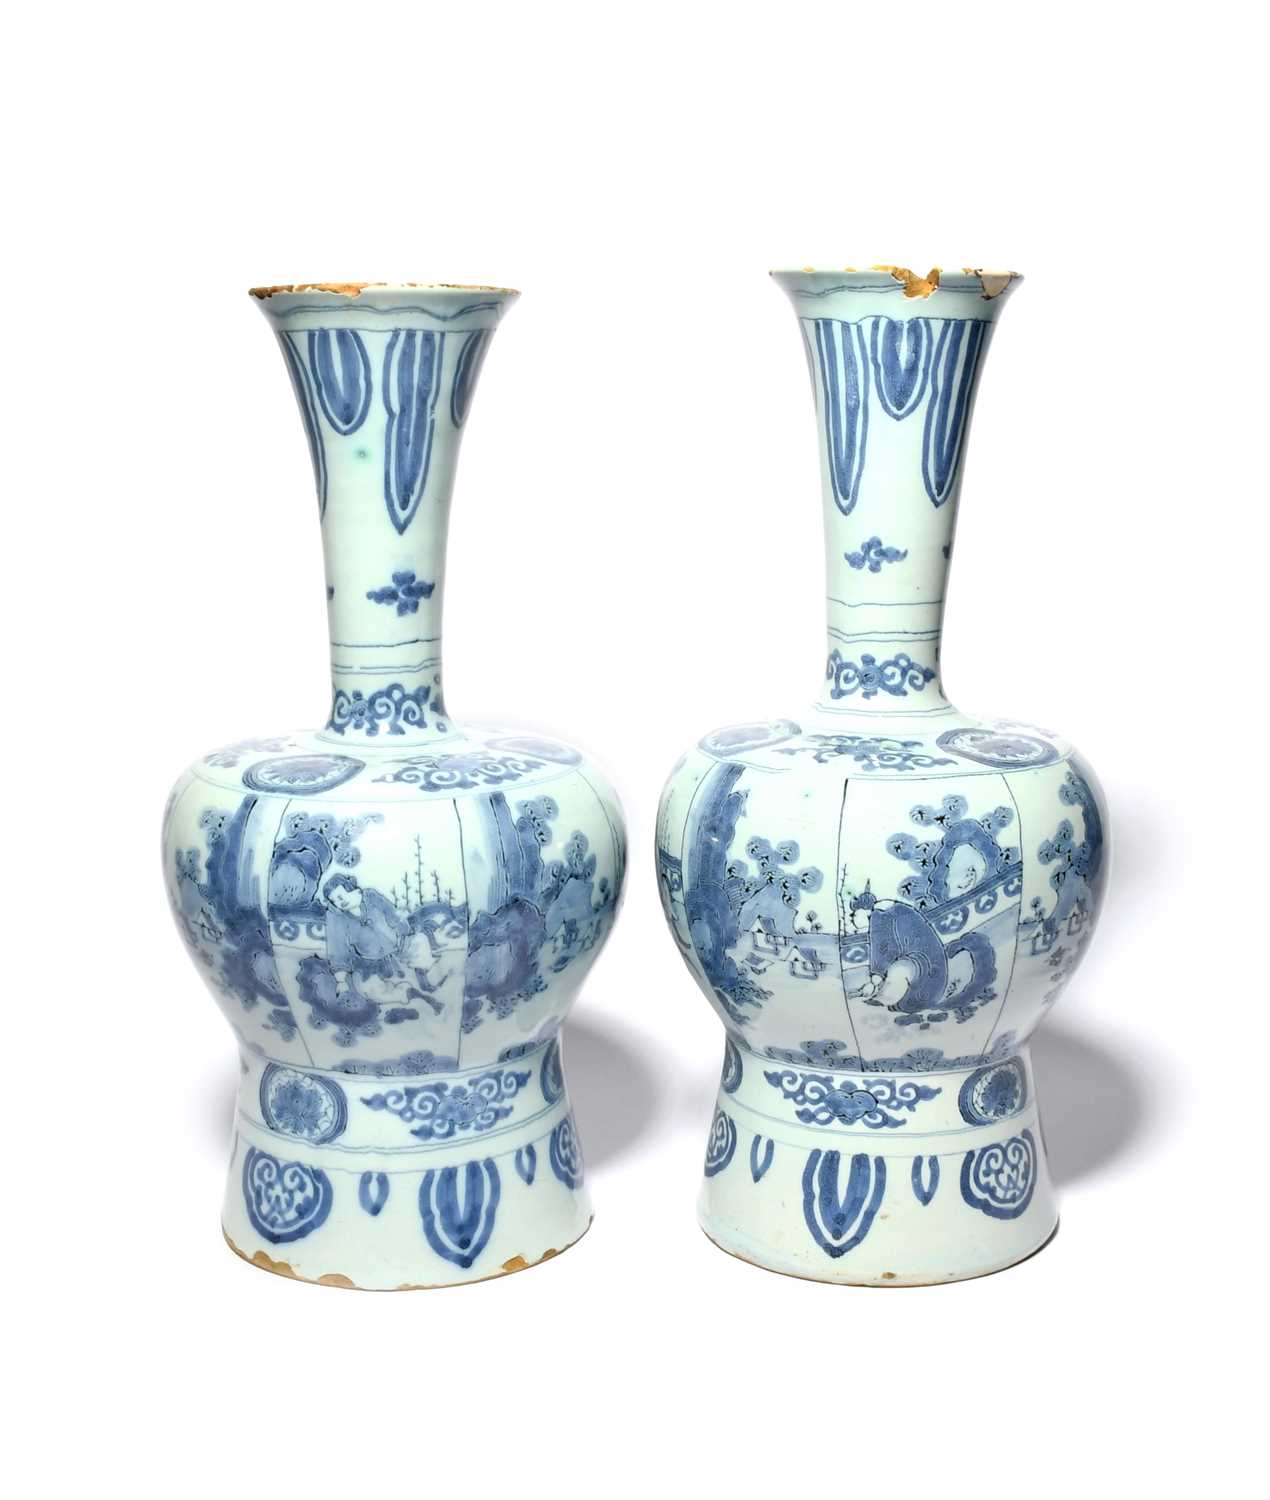 A pair of large Delft vases, c.1700, of Chinese shape, the baluster bodies painted with panels of